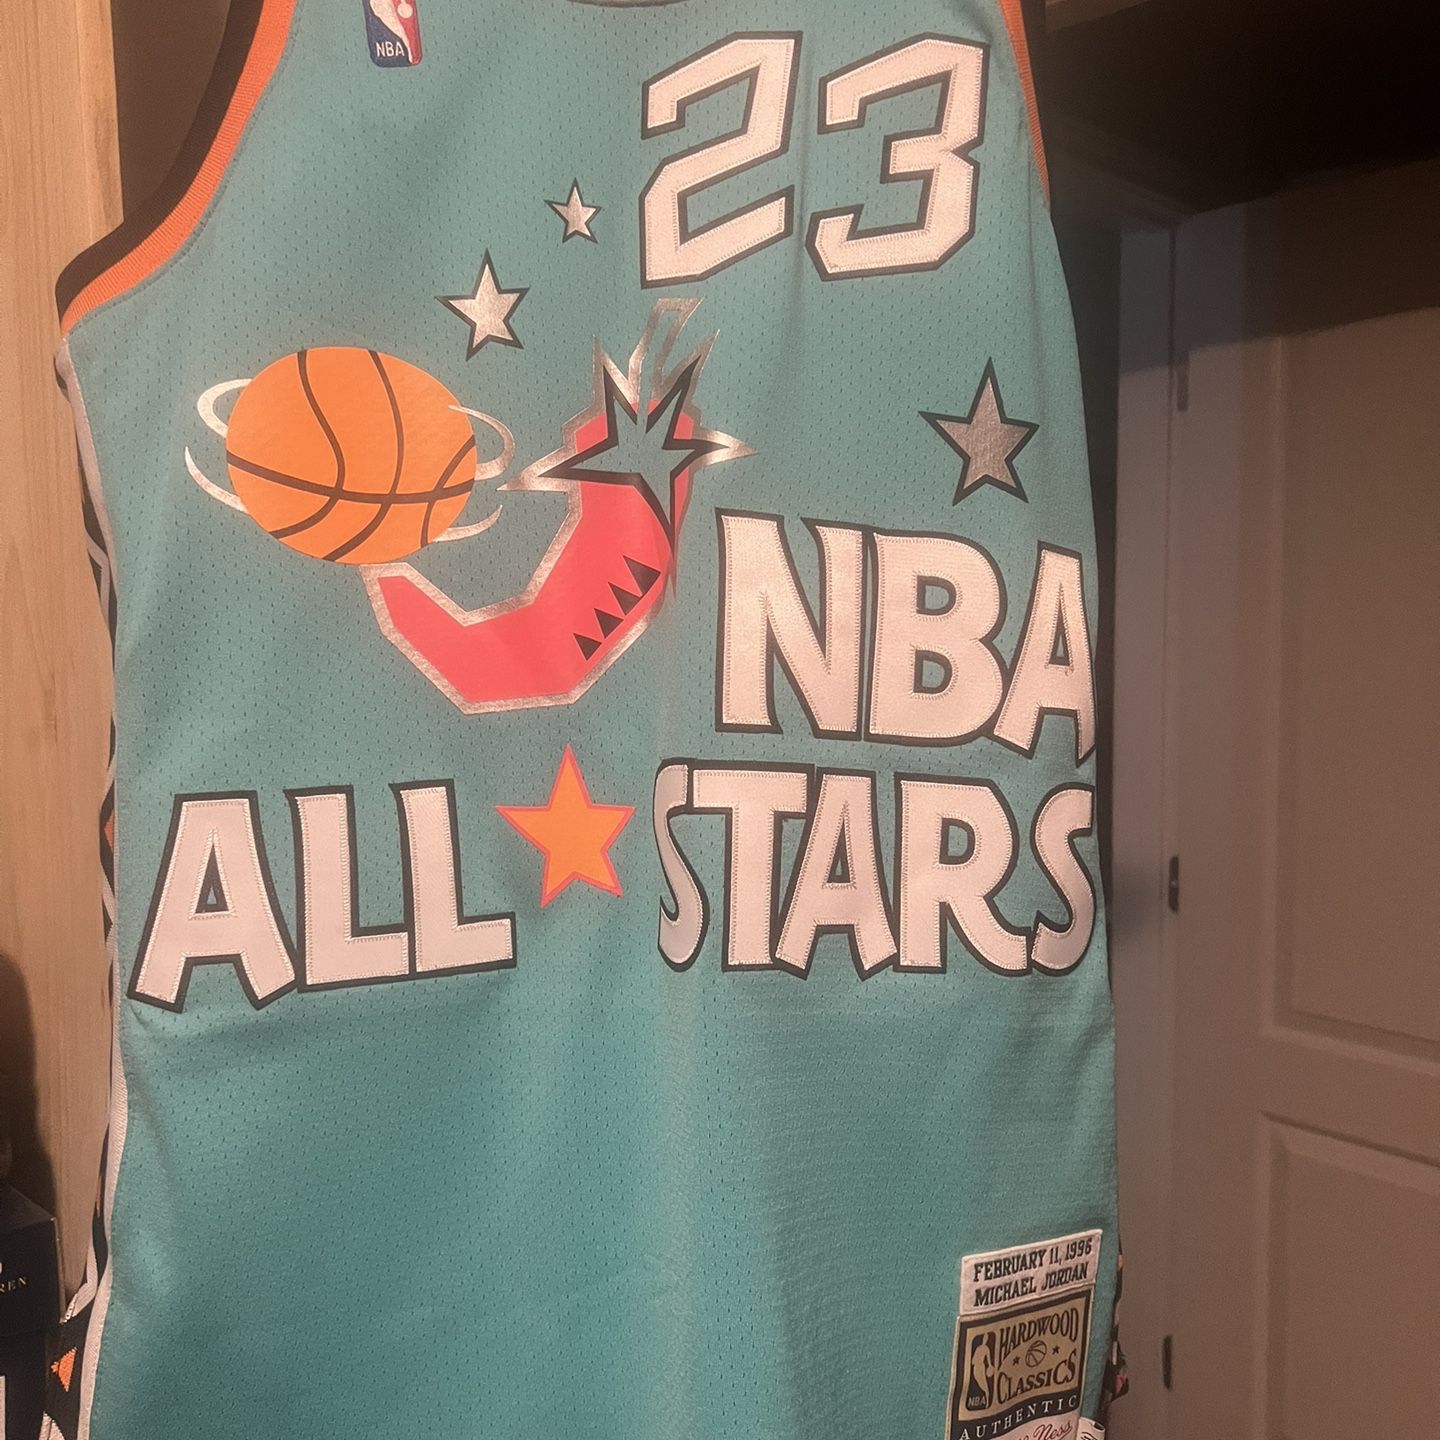 Jordan Authentic Jersey; Hardwood Classics. Mitchell & Ness. Size Large(44)  for Sale in Sarasota, FL - OfferUp